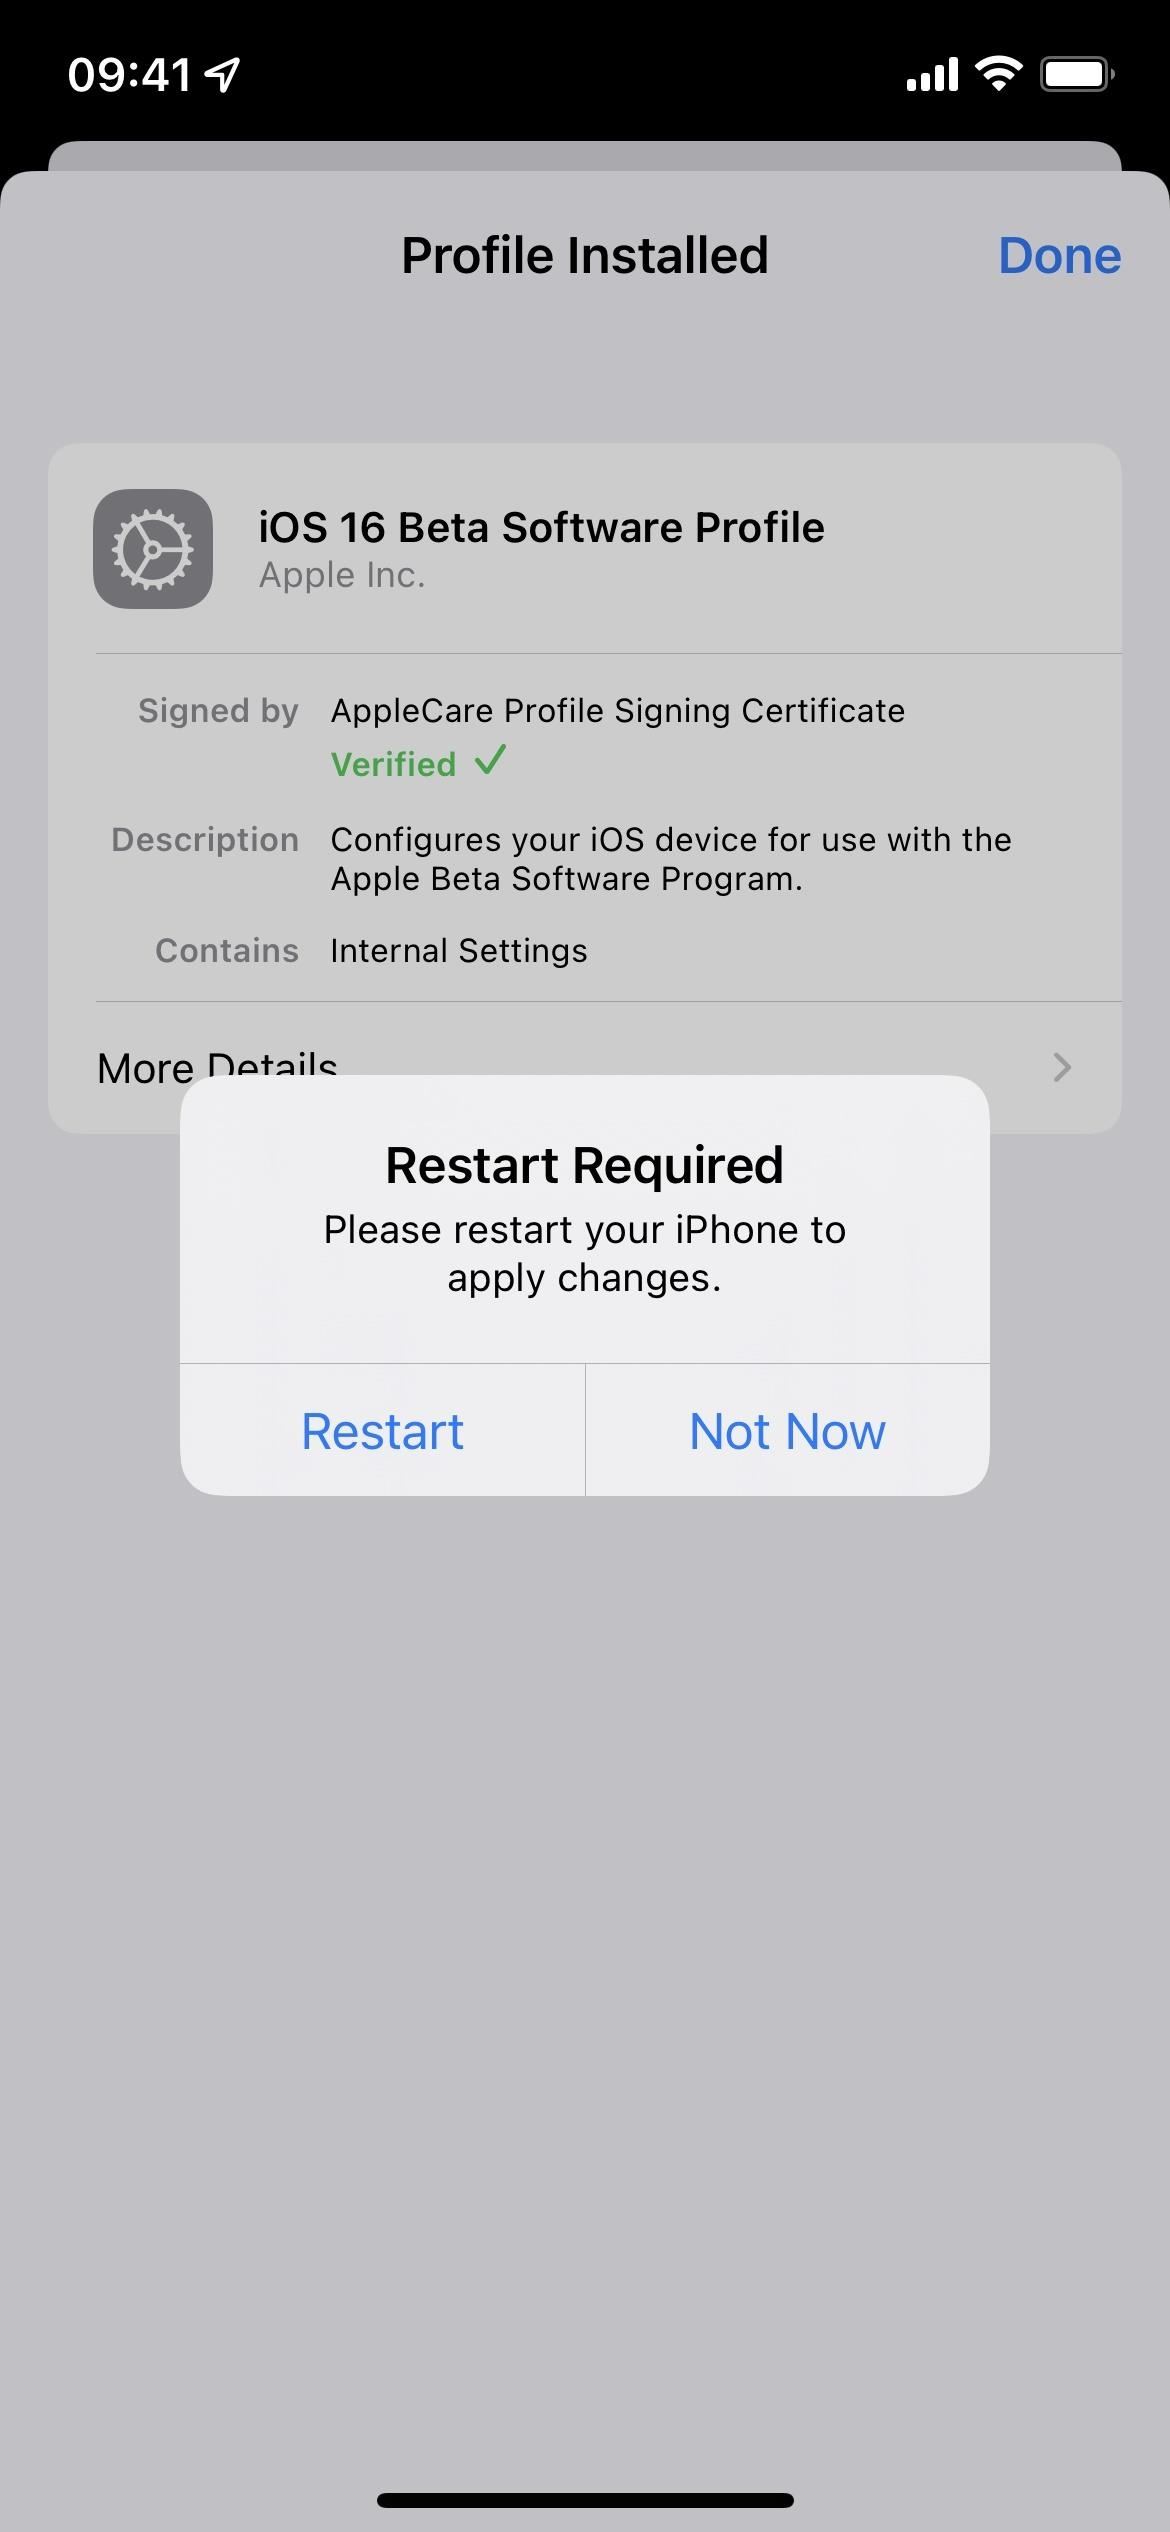 How to Download and Install iOS 16 Beta on Your iPhone Right Now